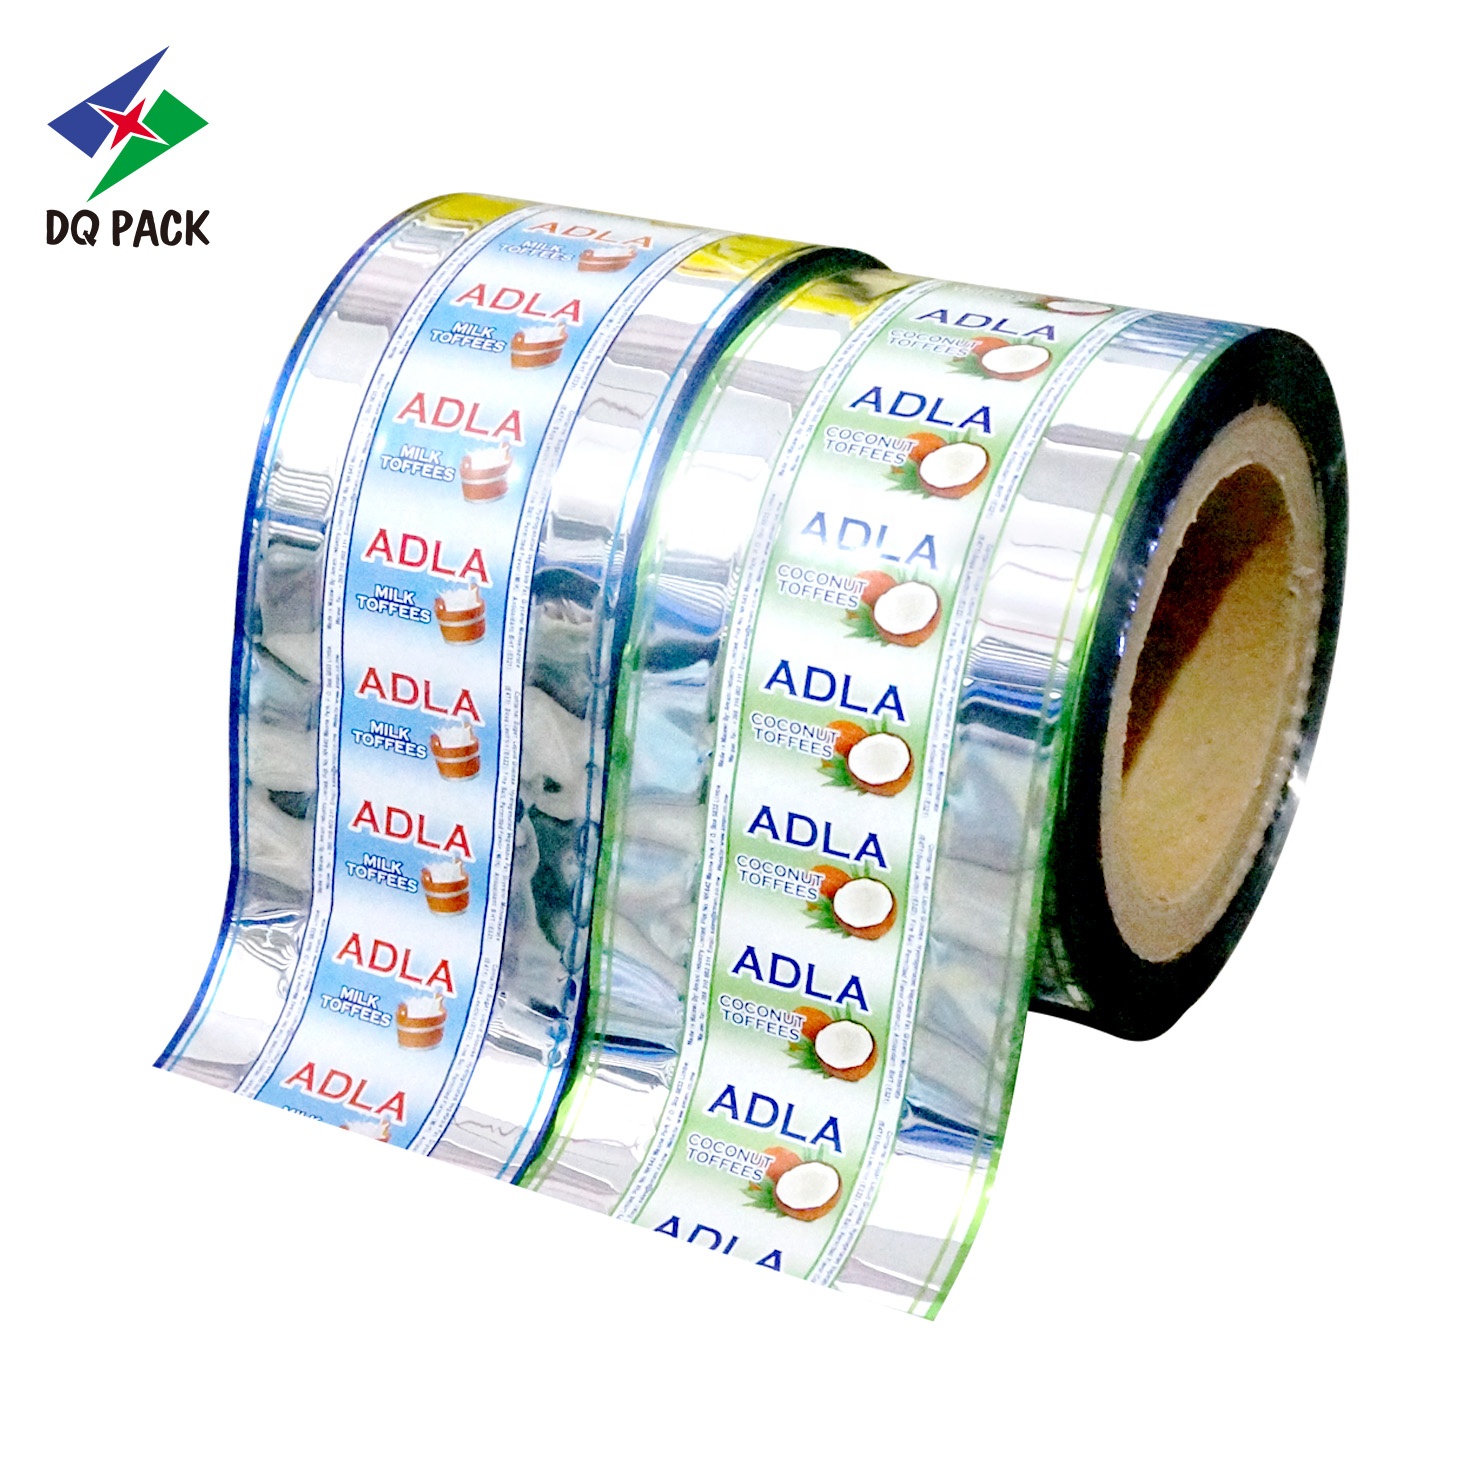 DQ PACK China Factory Printed Film Aluminum Plastic Roll Film  Food Packaging Roll Stock Film